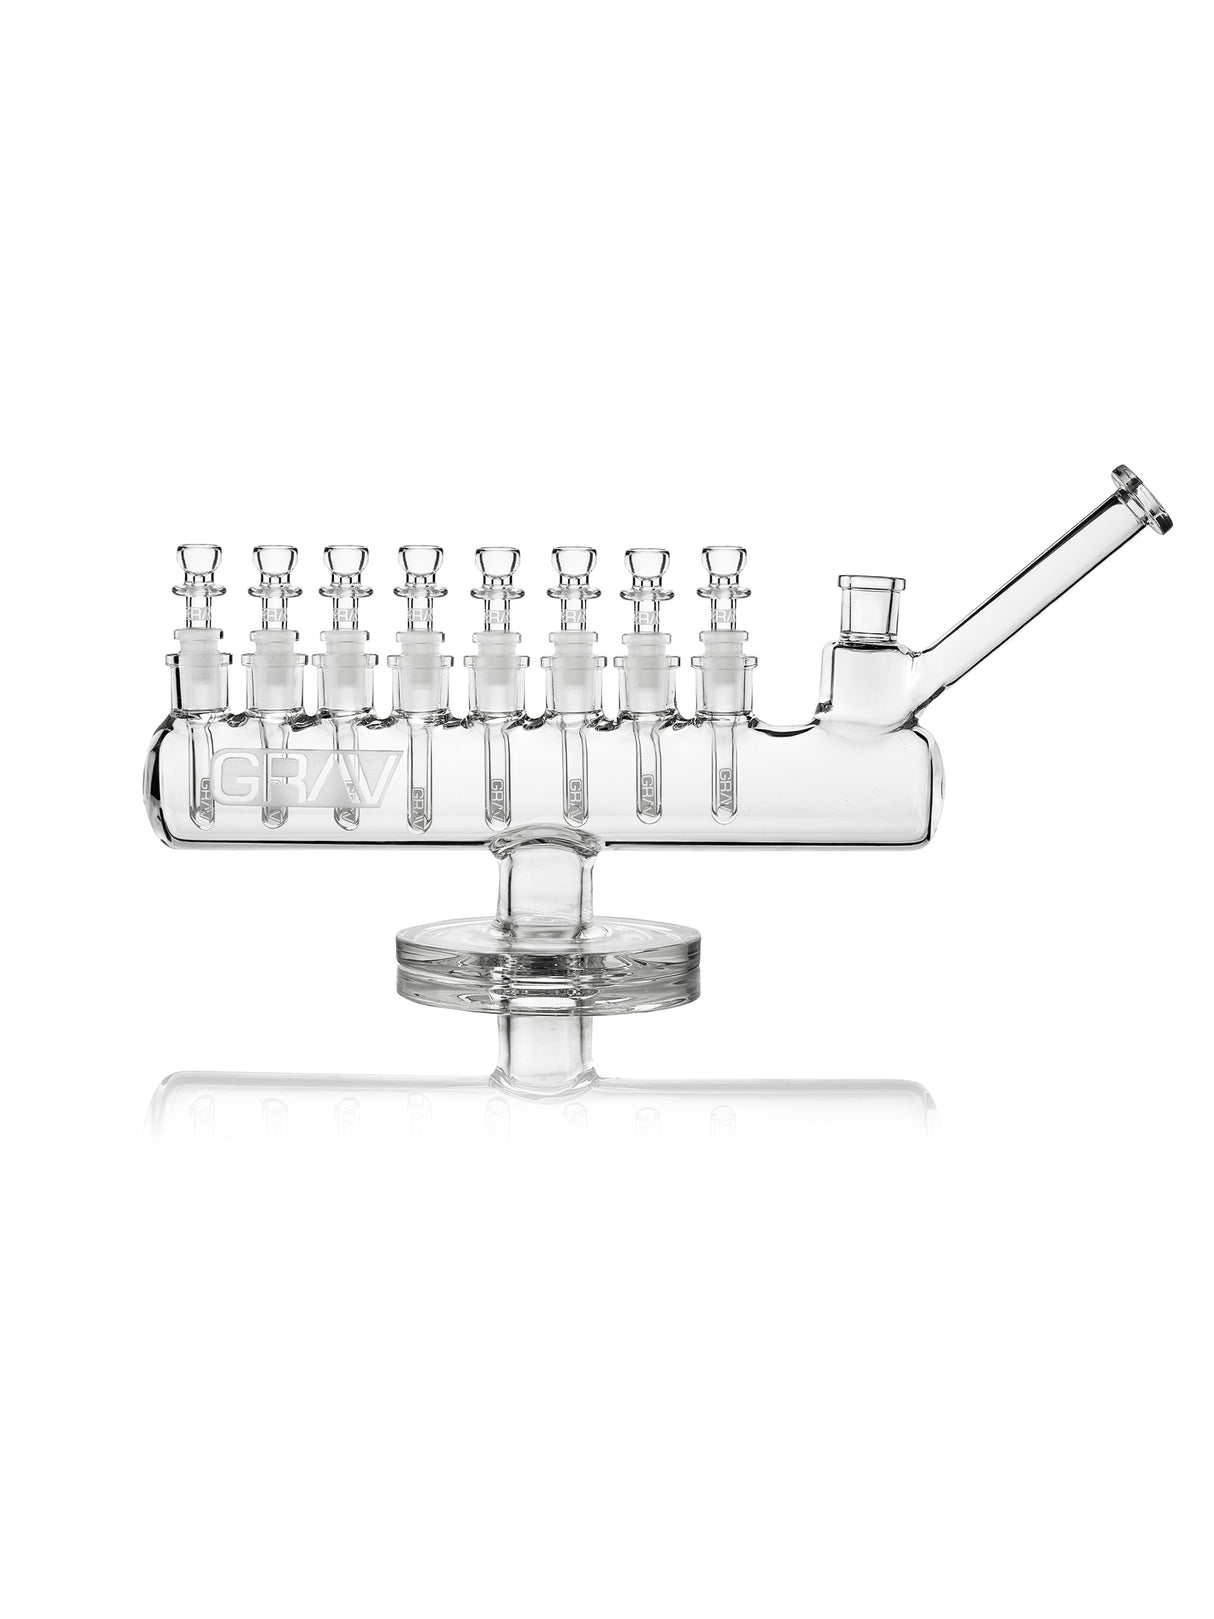 GRAV Clear Menorah Bong with Slit-Diffuser Percolator, Front View on White Background